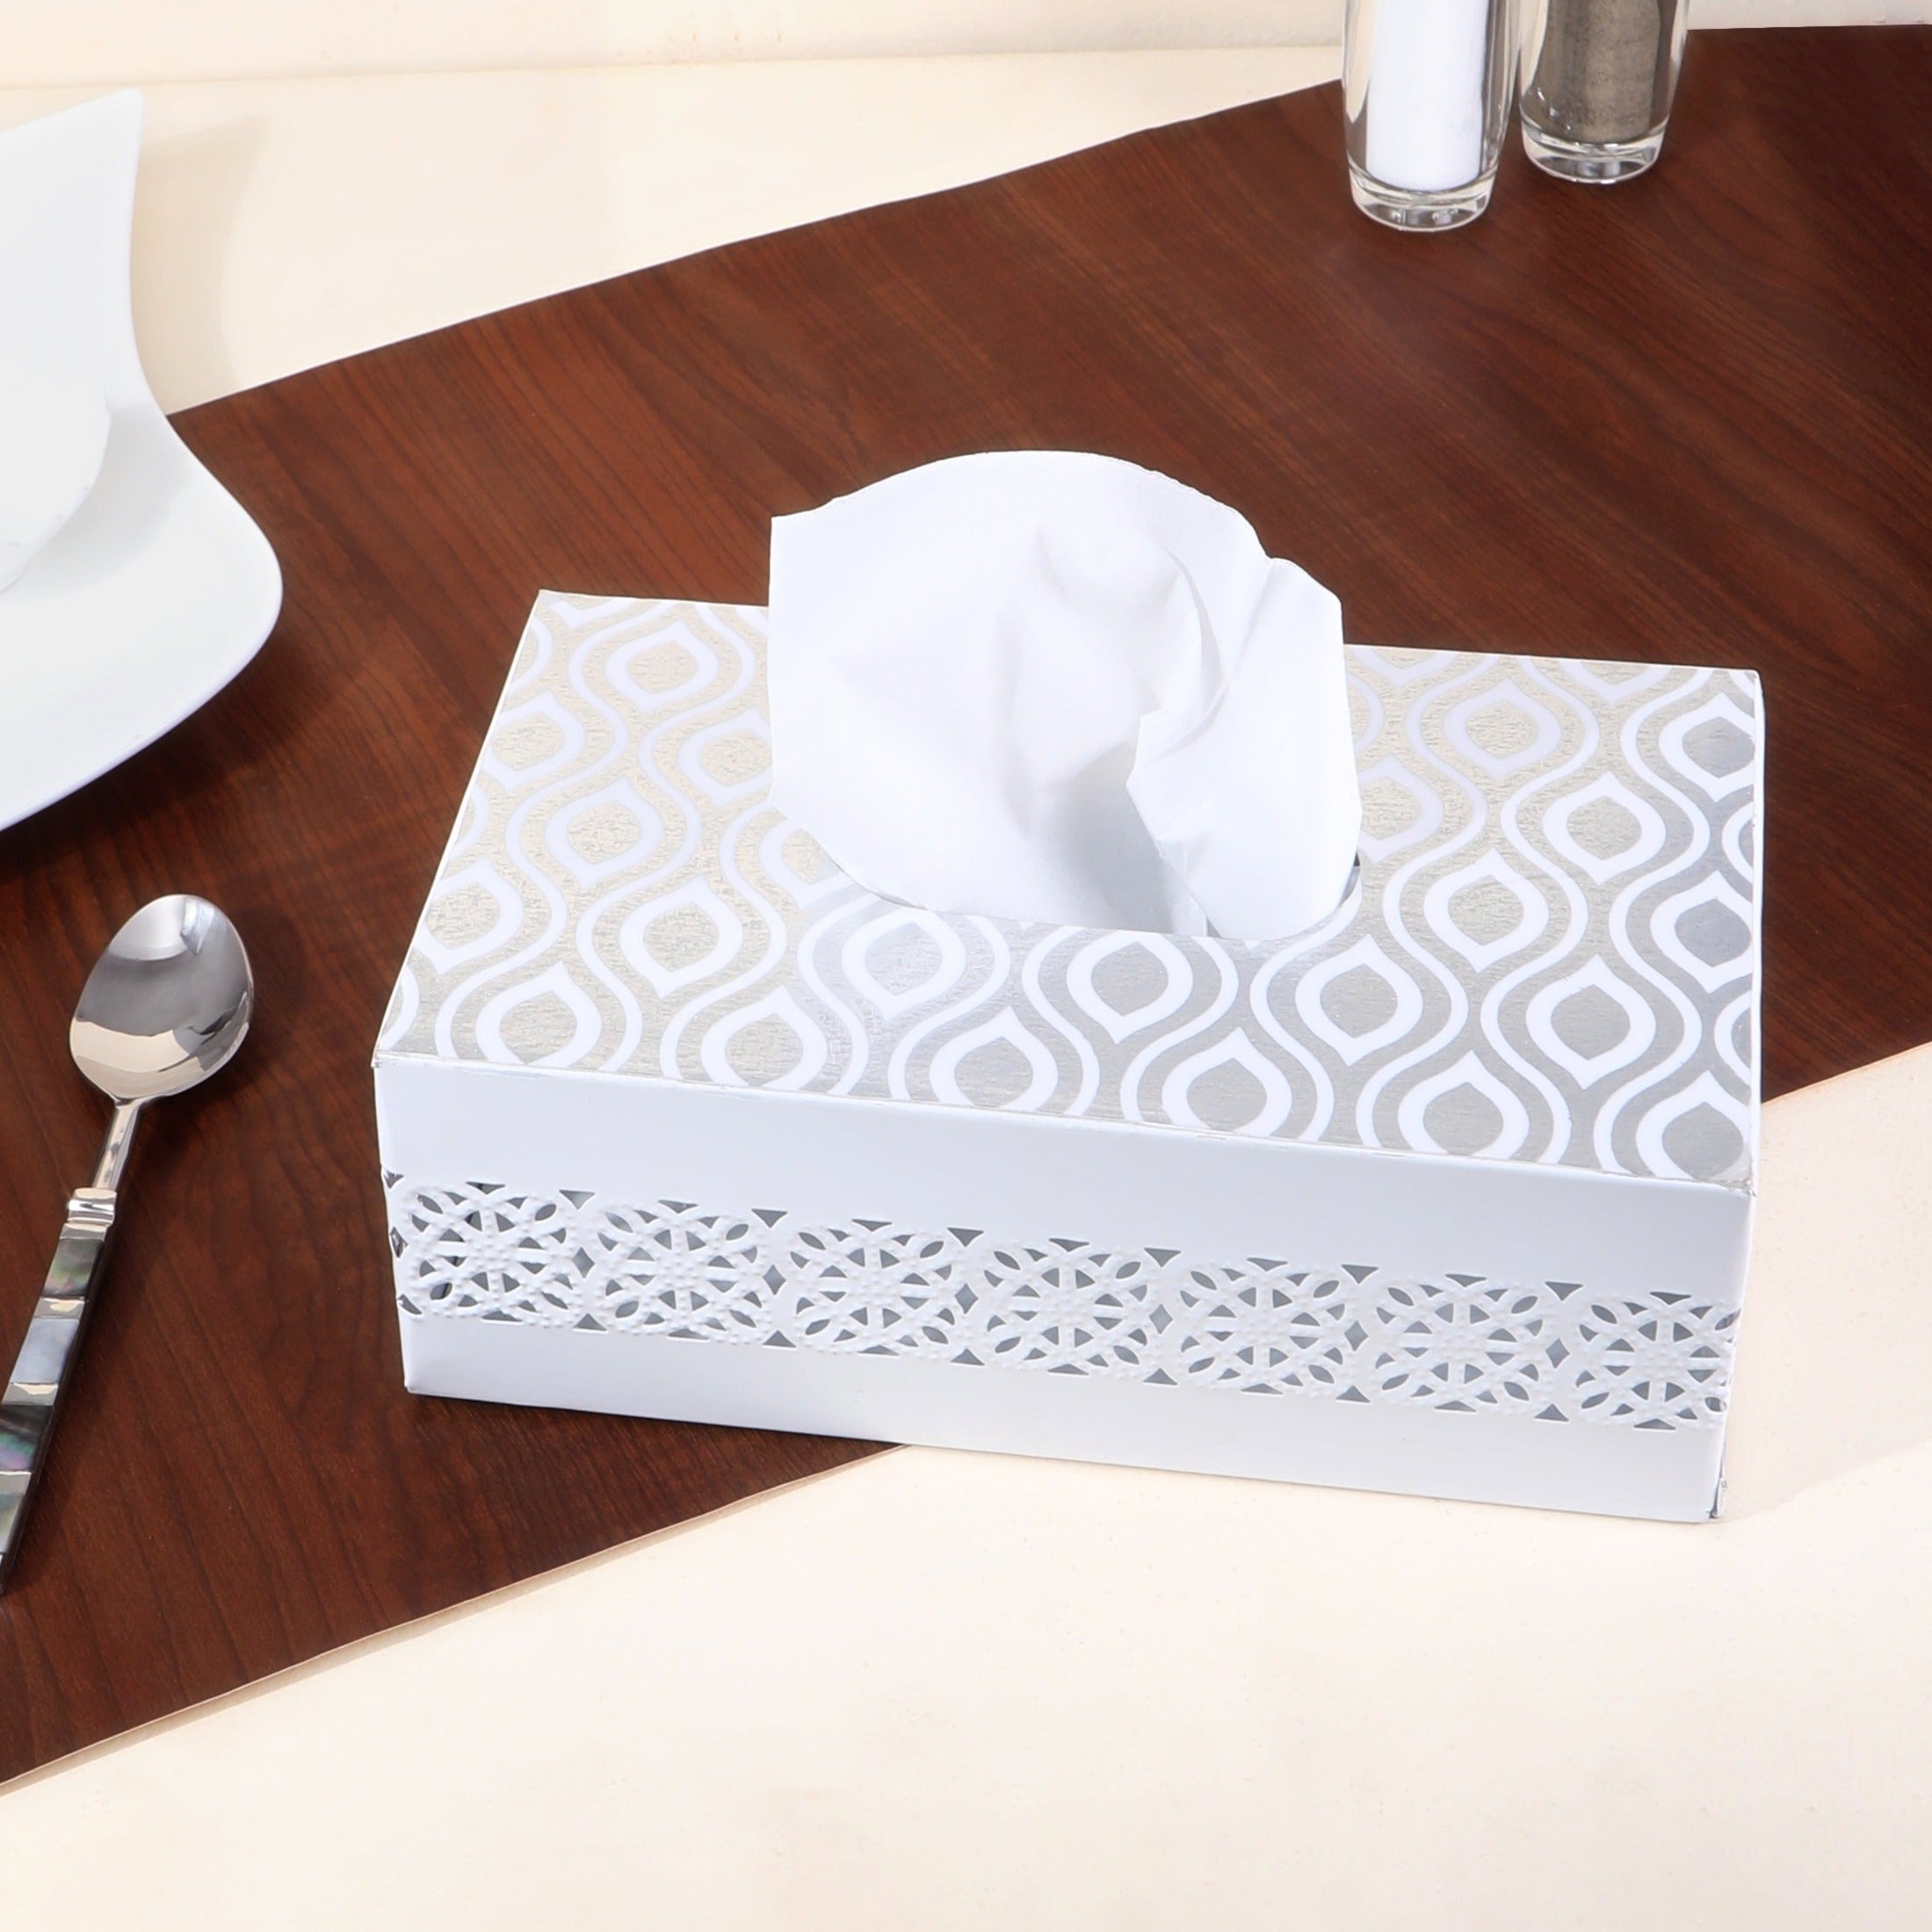 Tissue Box - Silver Metal - The Home Co.